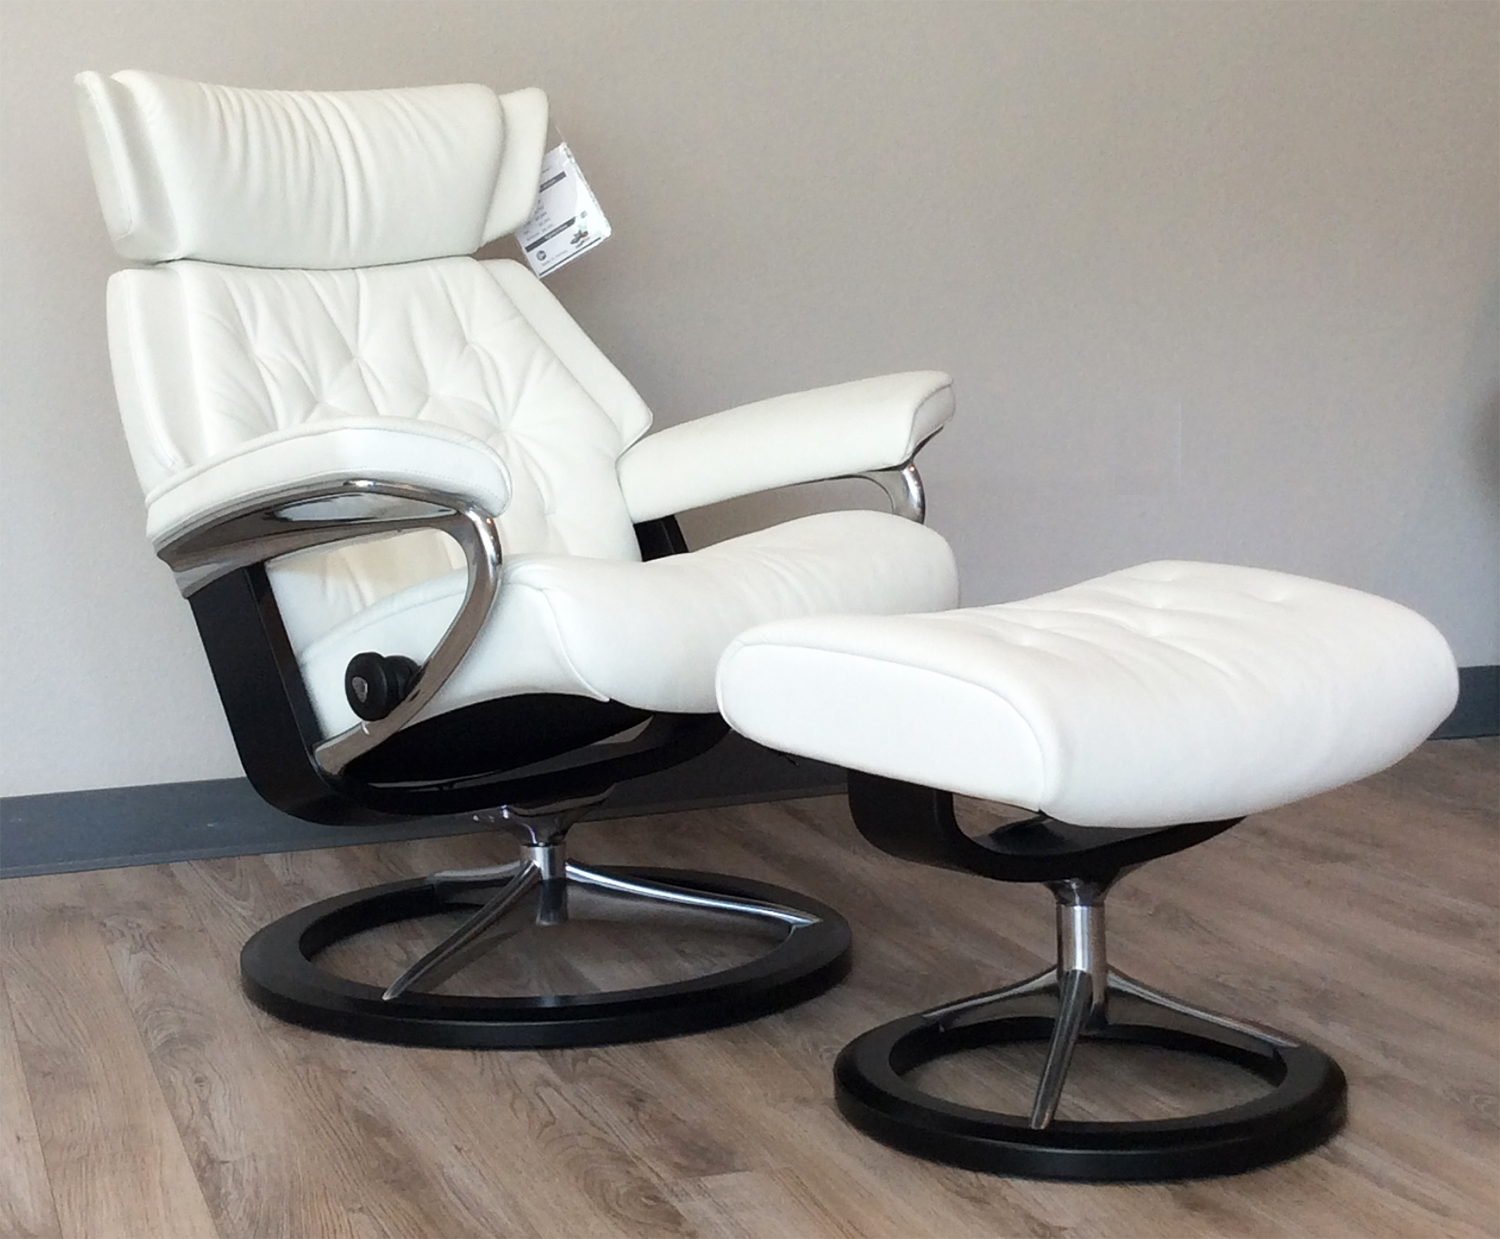 Stressless Skyline Signature Base, White Leather Recliners